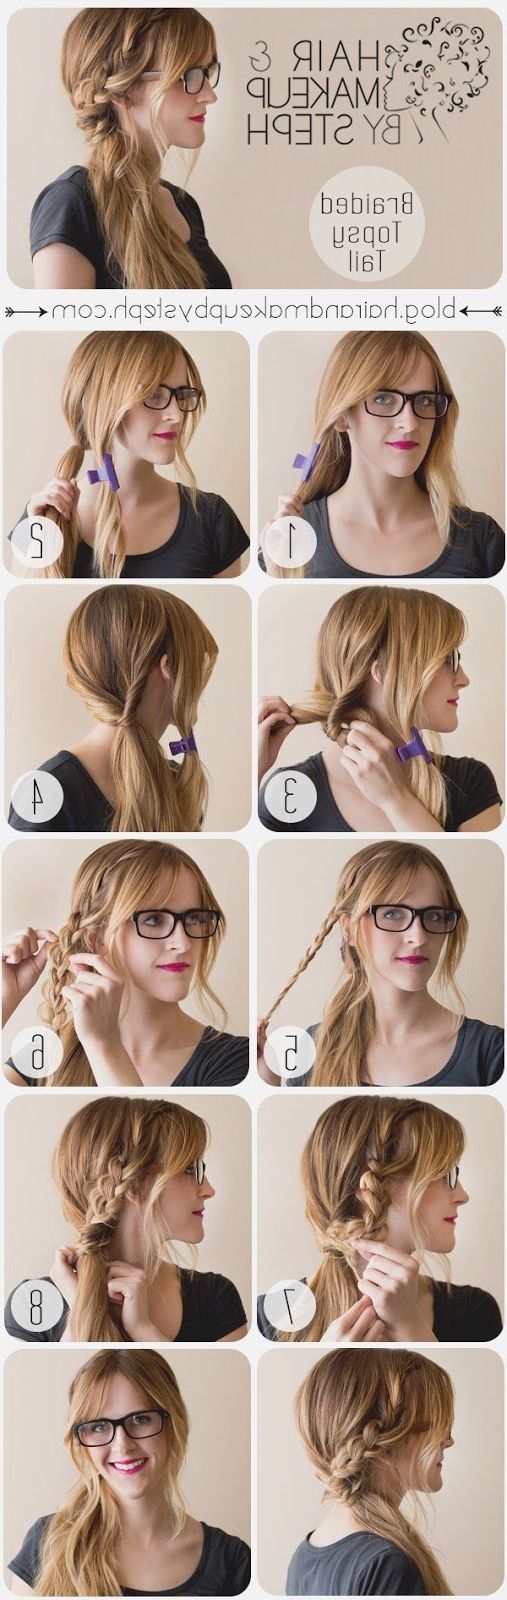 15 Simple Hairstyle Ideas Ready For Less Than 2 Minutes And Looks In Well Liked 2 Minute Side Pony Hairstyles (View 3 of 20)